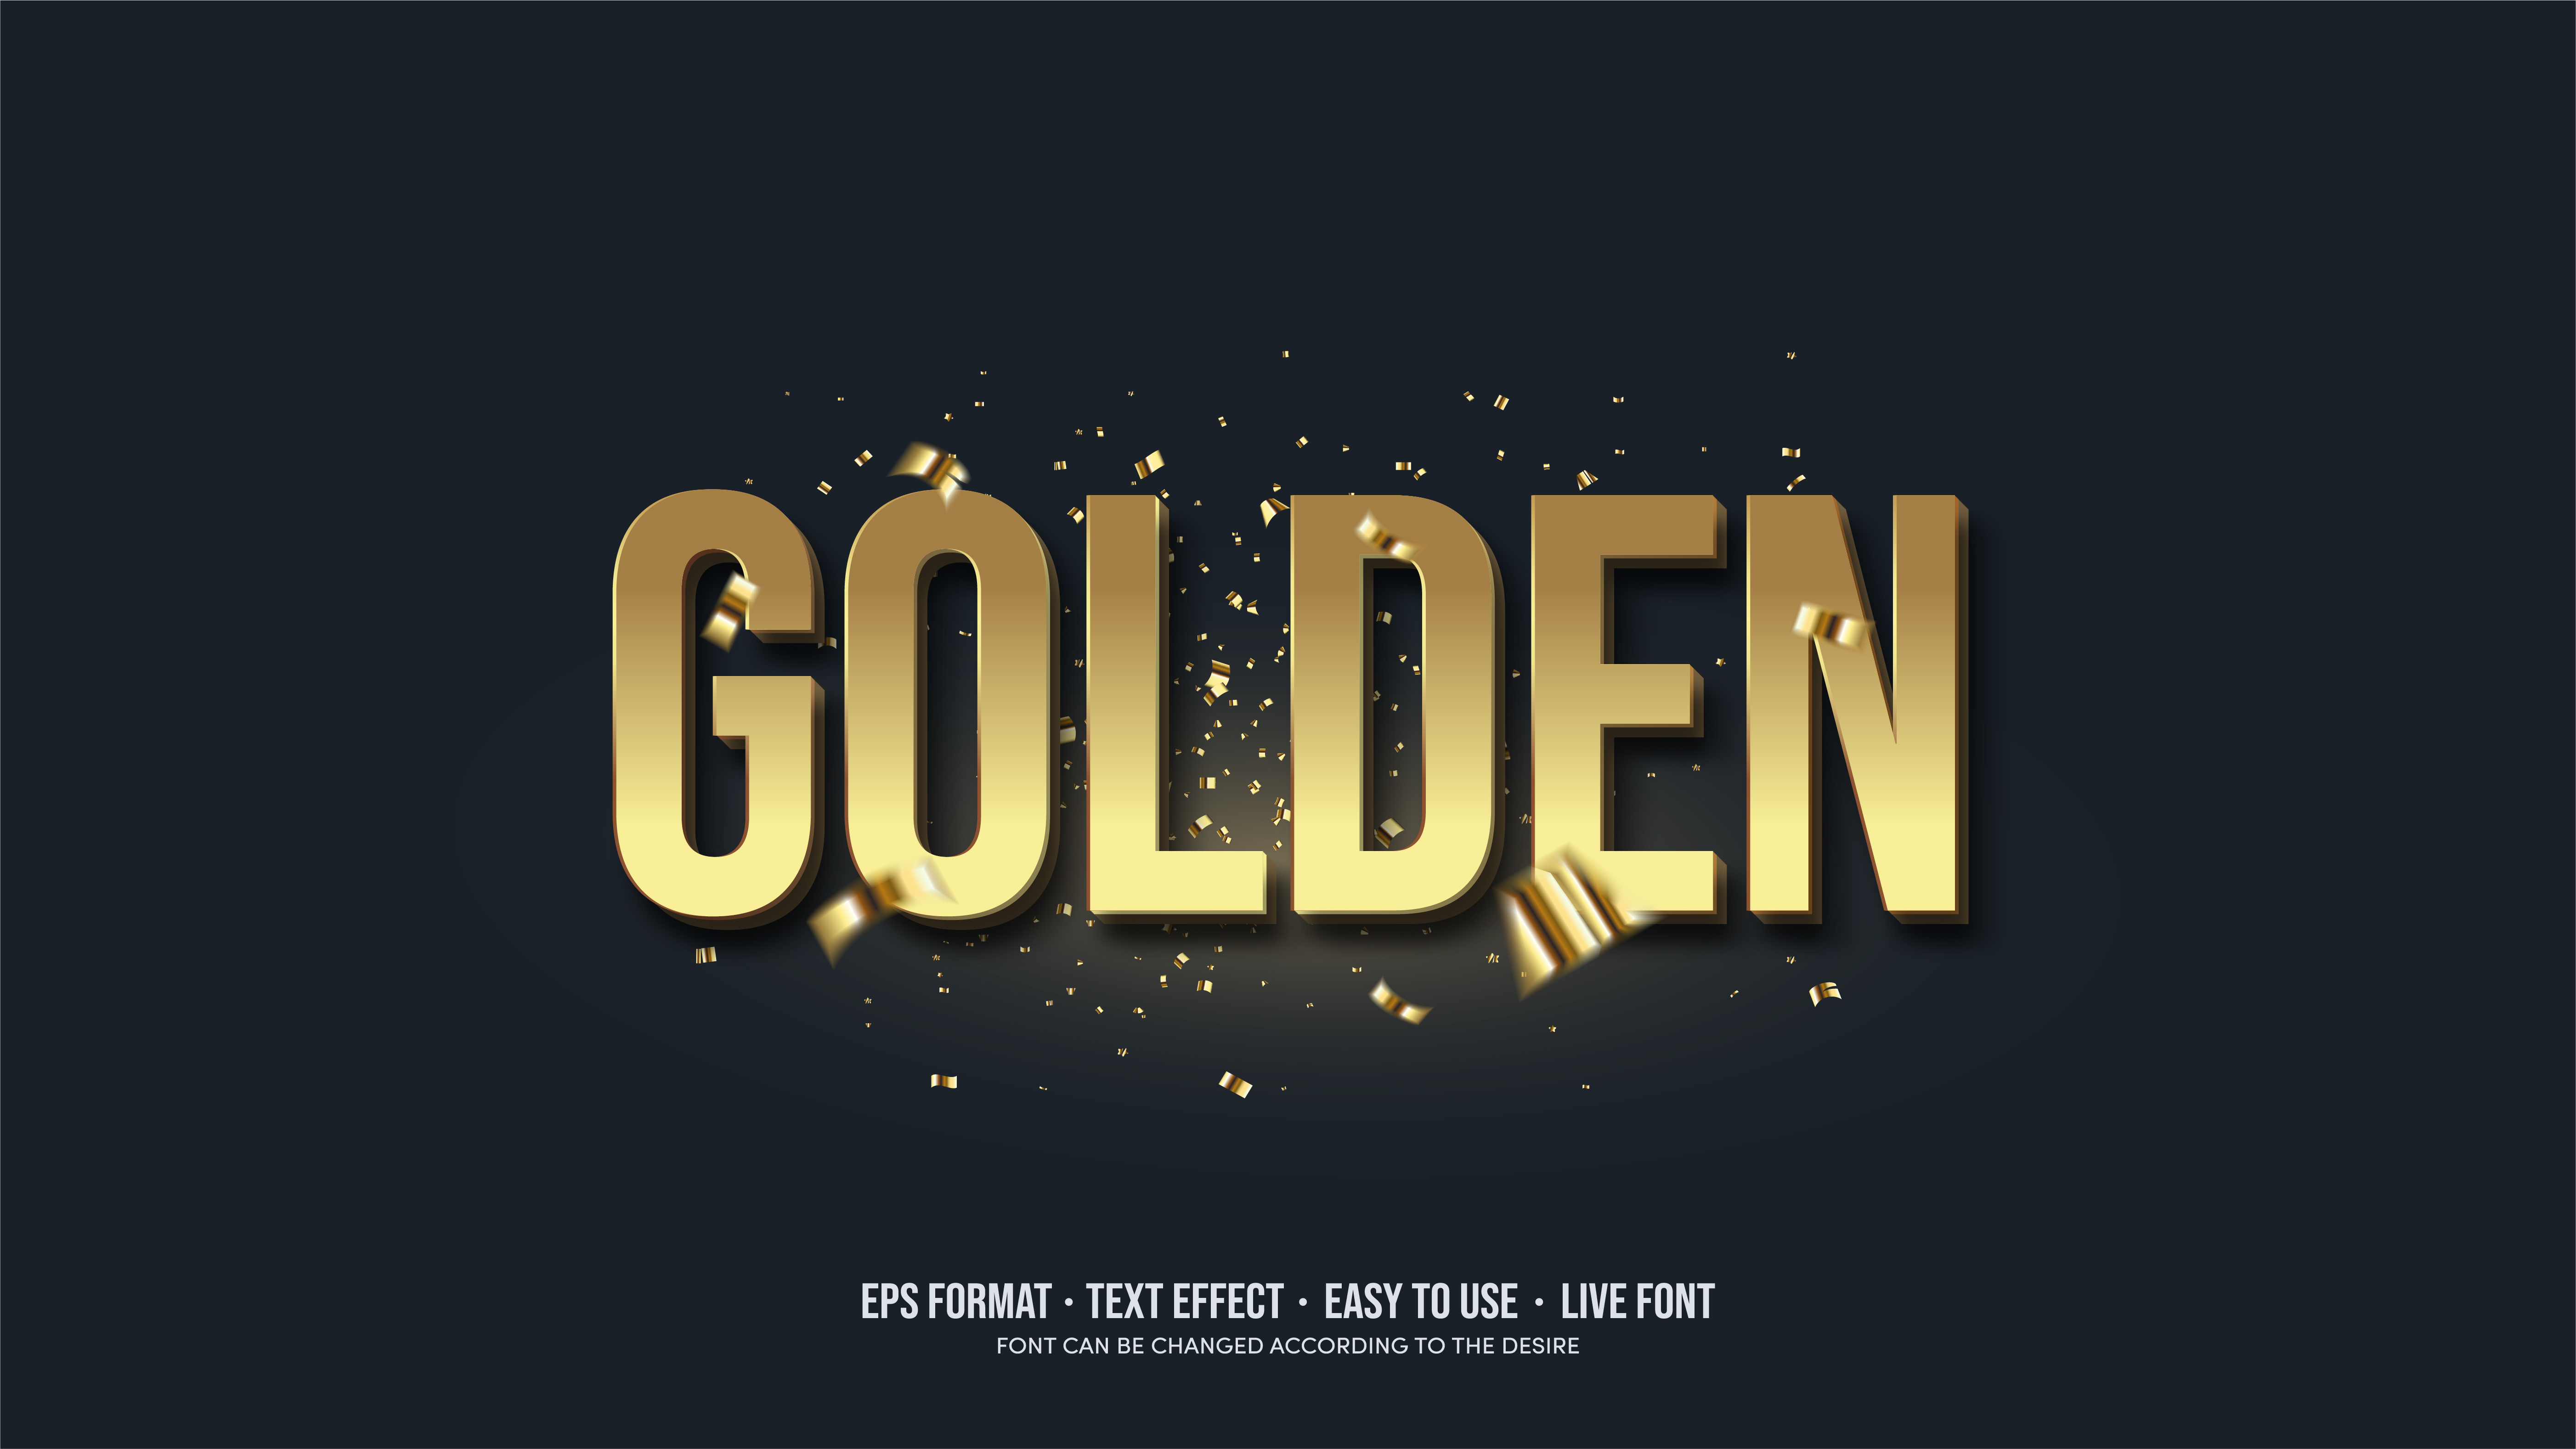 Golden Text After Effects Template Free